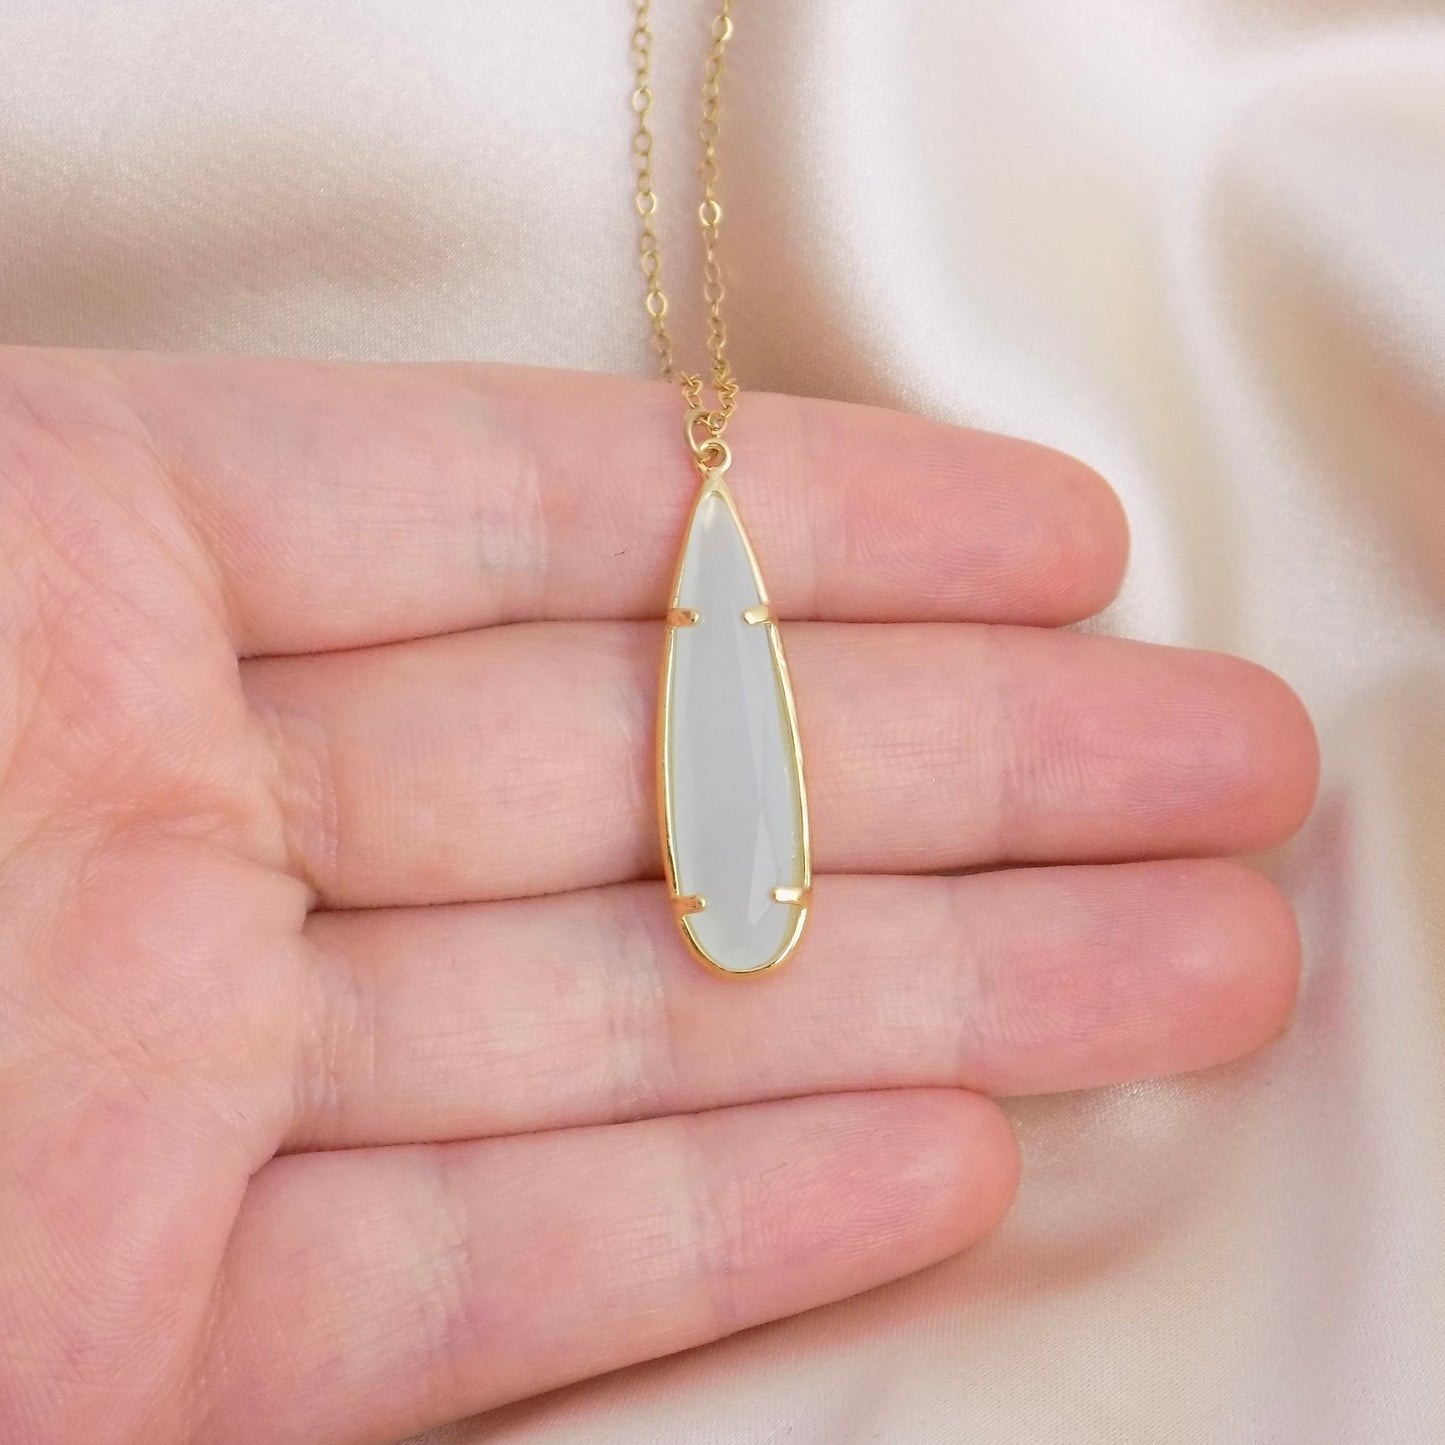 Aqua Chalcedony Necklace Gold, Sea Blue Crystal Pendant, Bridesmaid Gift, Gifts For Mom, M6-122